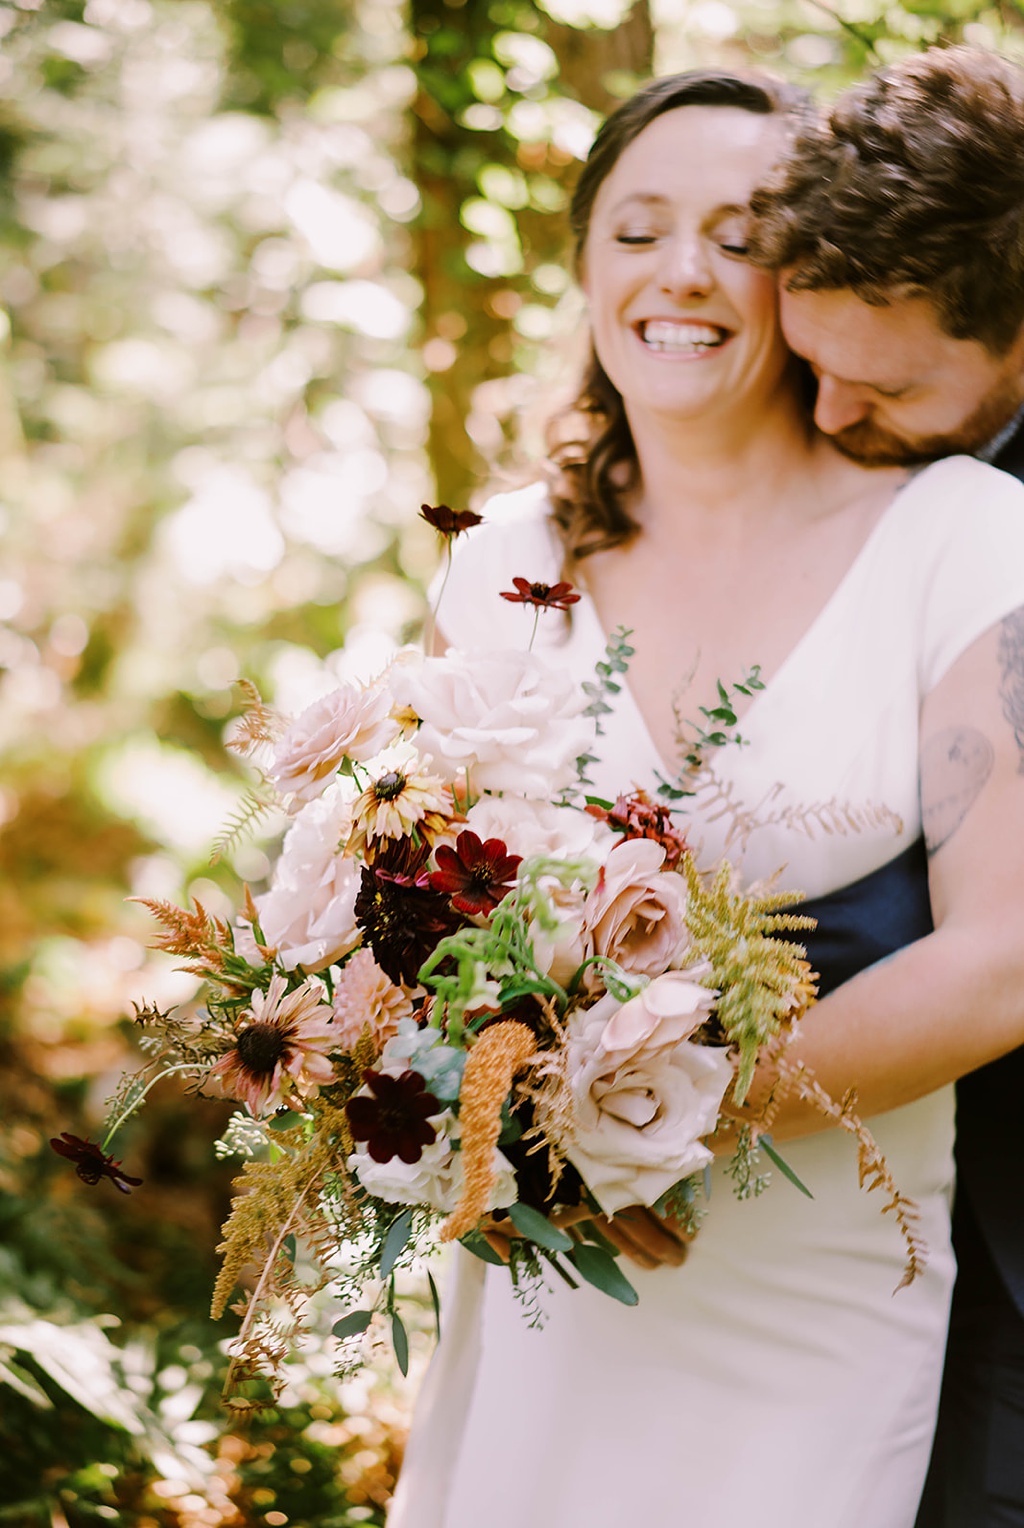 A couple laughing and holding a bouquet in this summer wedding